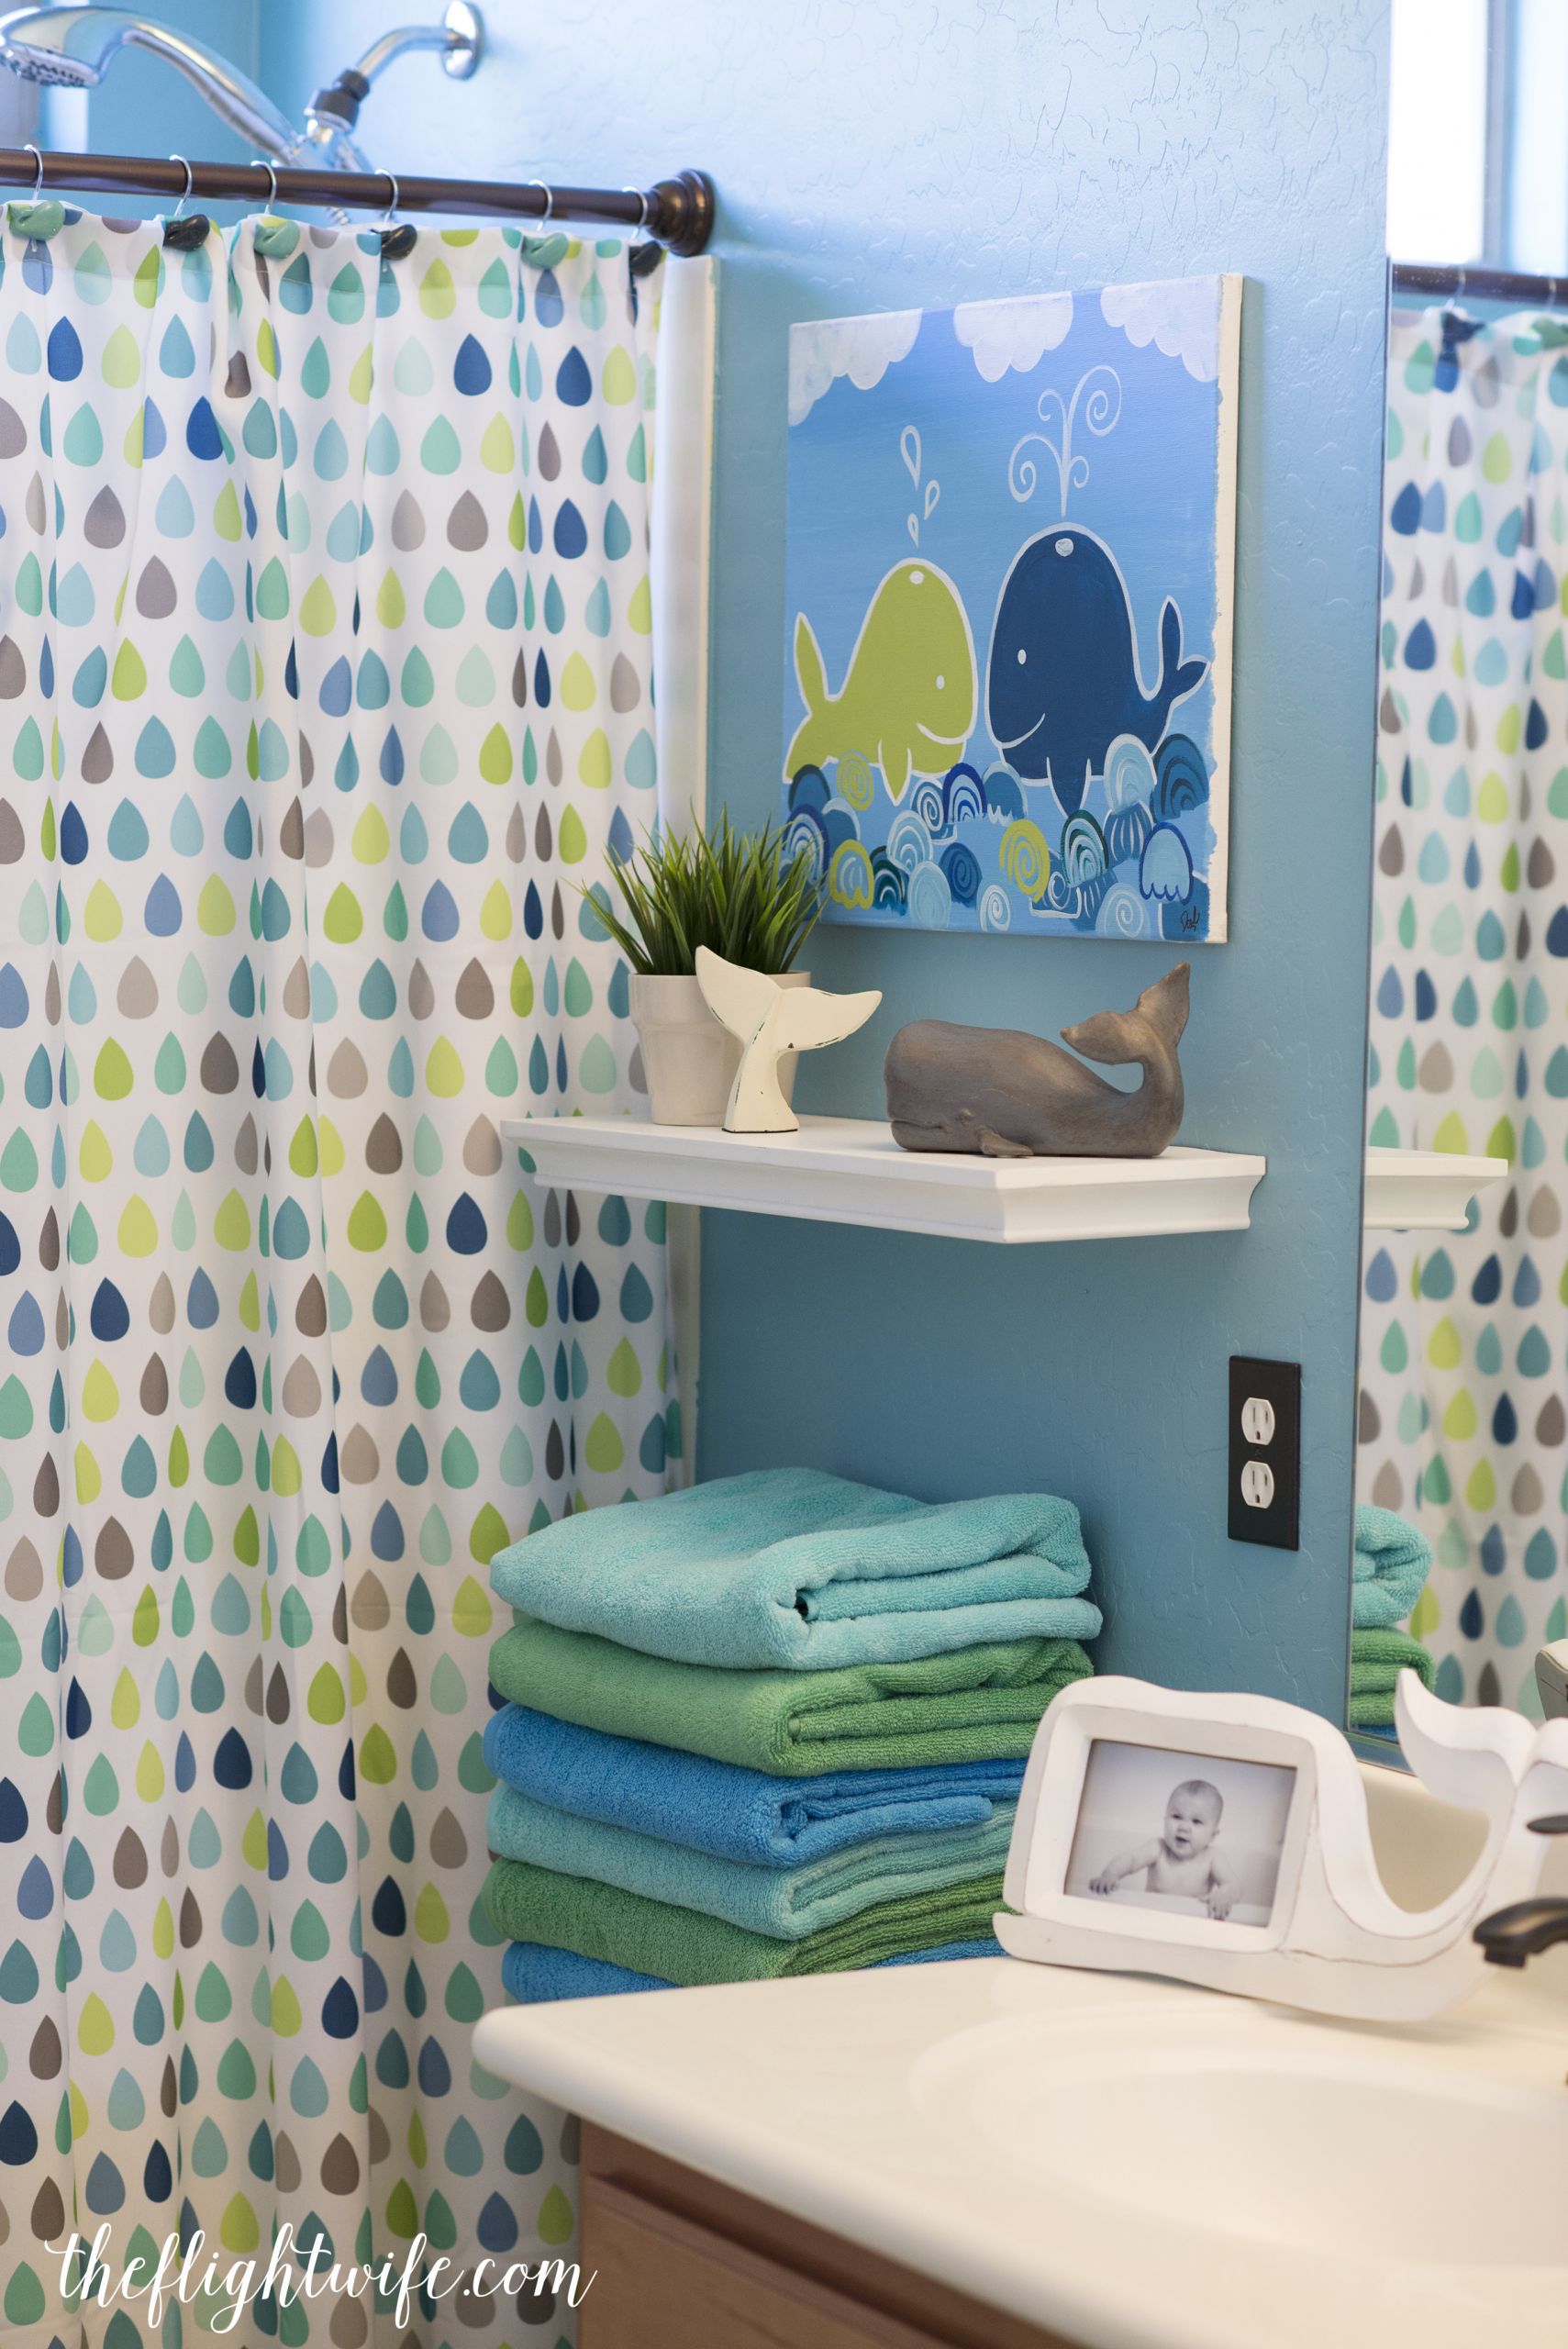 Kids Bath Room Decor
 Kids Bathroom Makeover Fun And Friendly Whales The